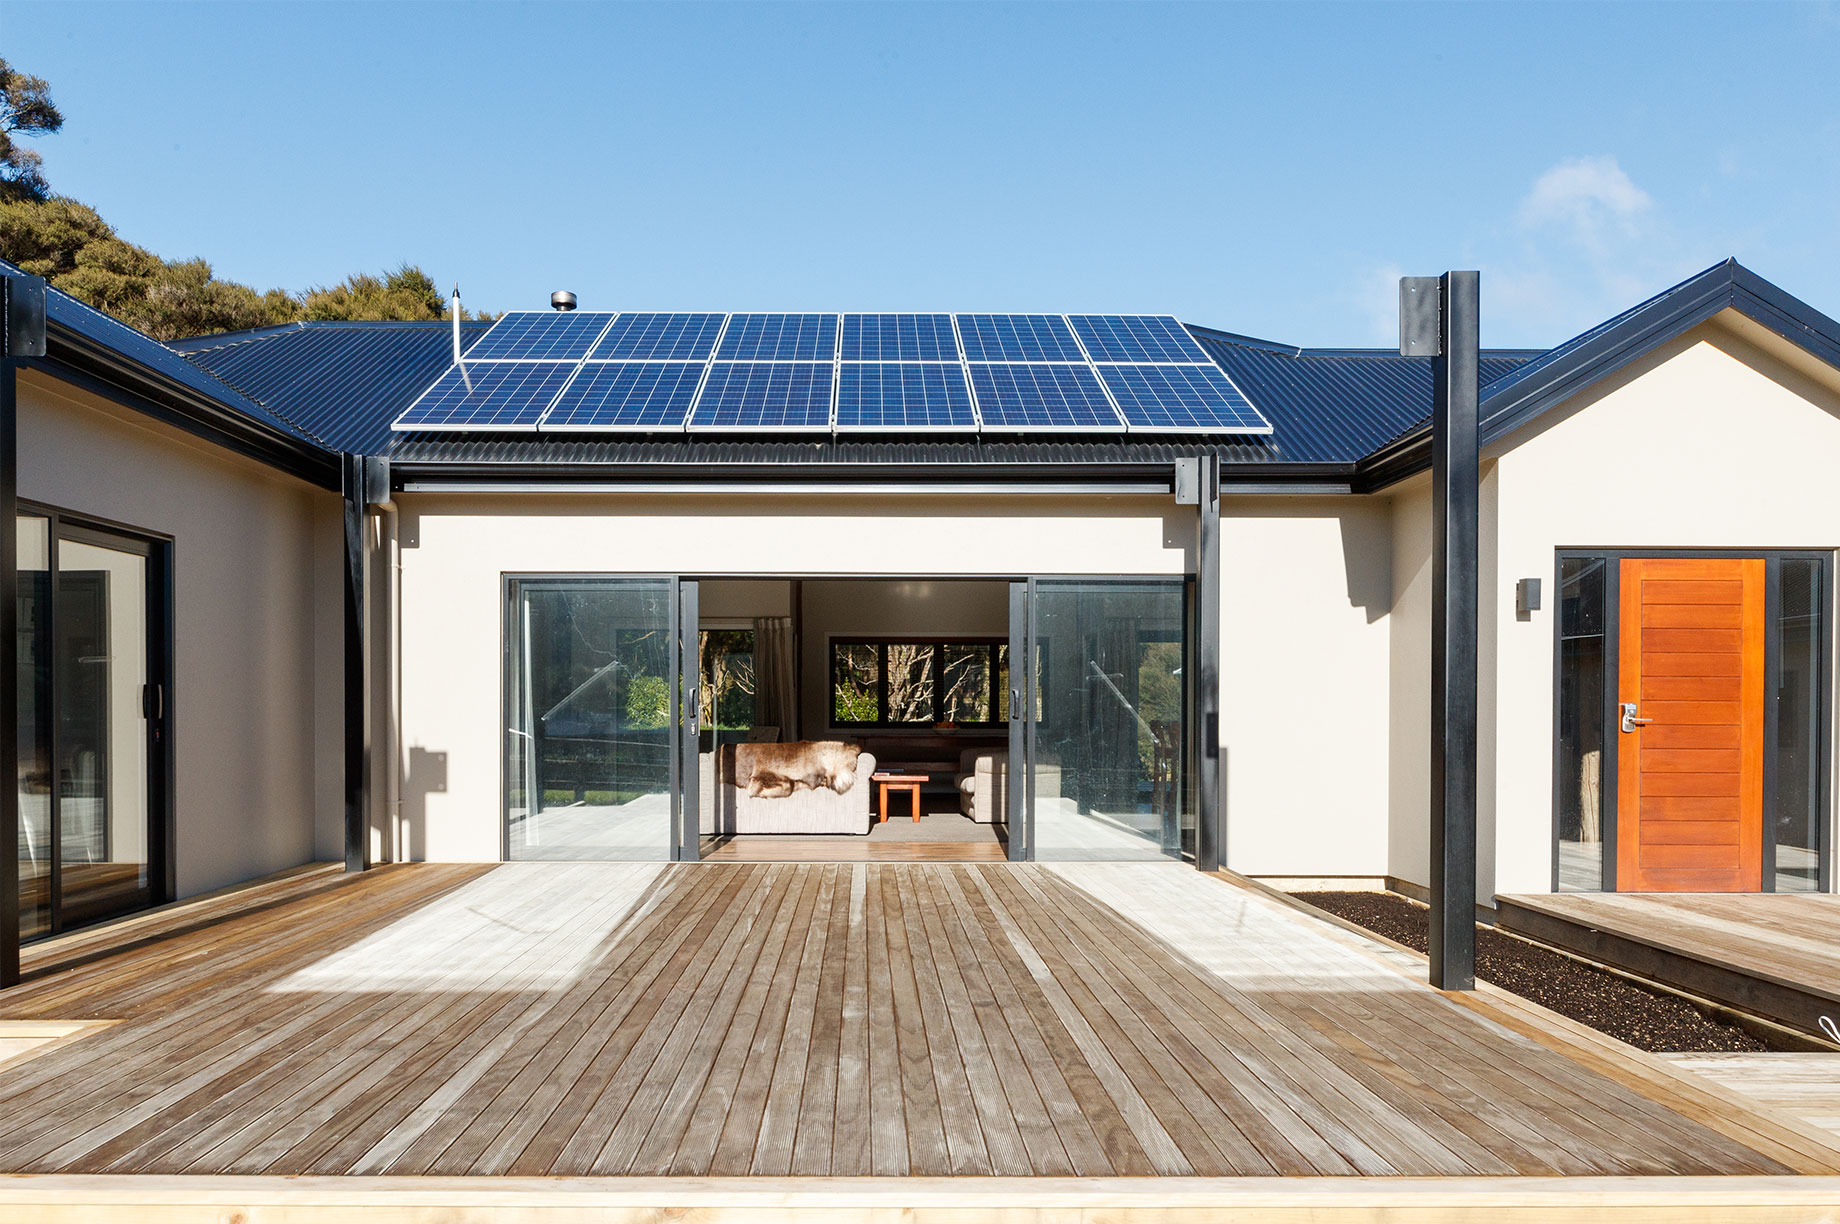 Exterior of a home with solar panels